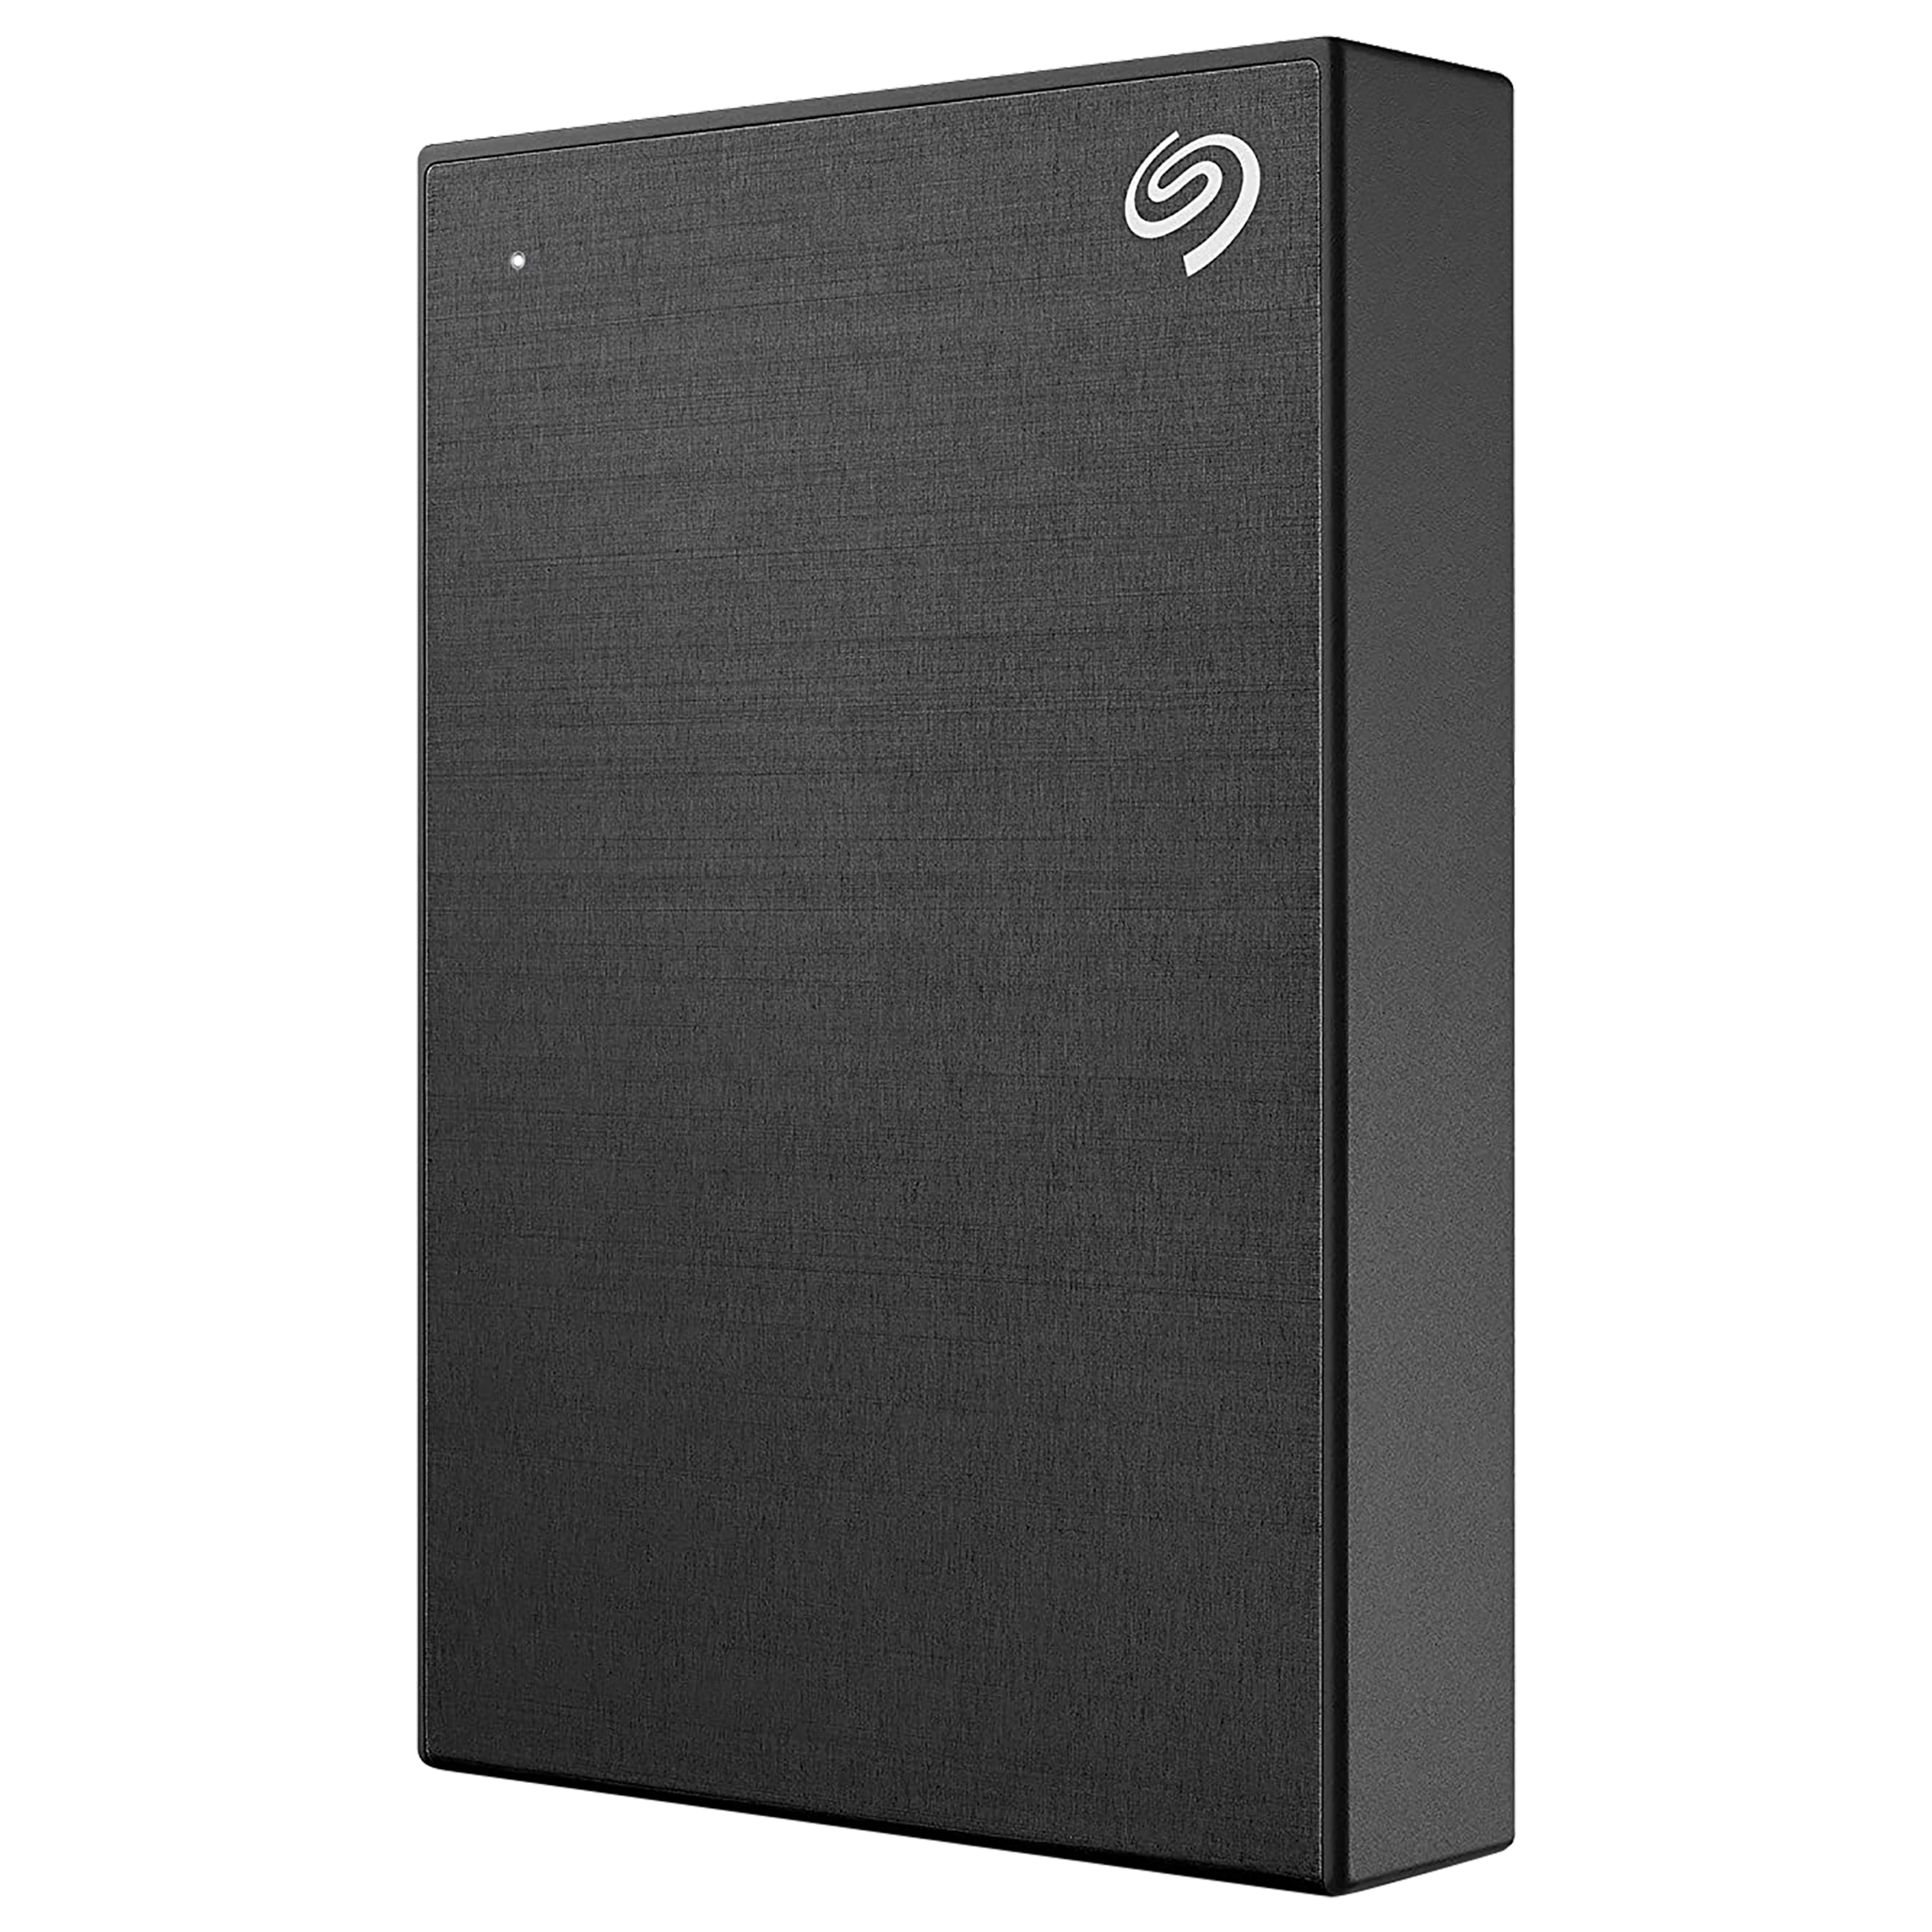 Seagate One Touch 5TB USB 3.0 Hard Disk Drive (Mac And Windows Compatible, STKZ5000400, Black)